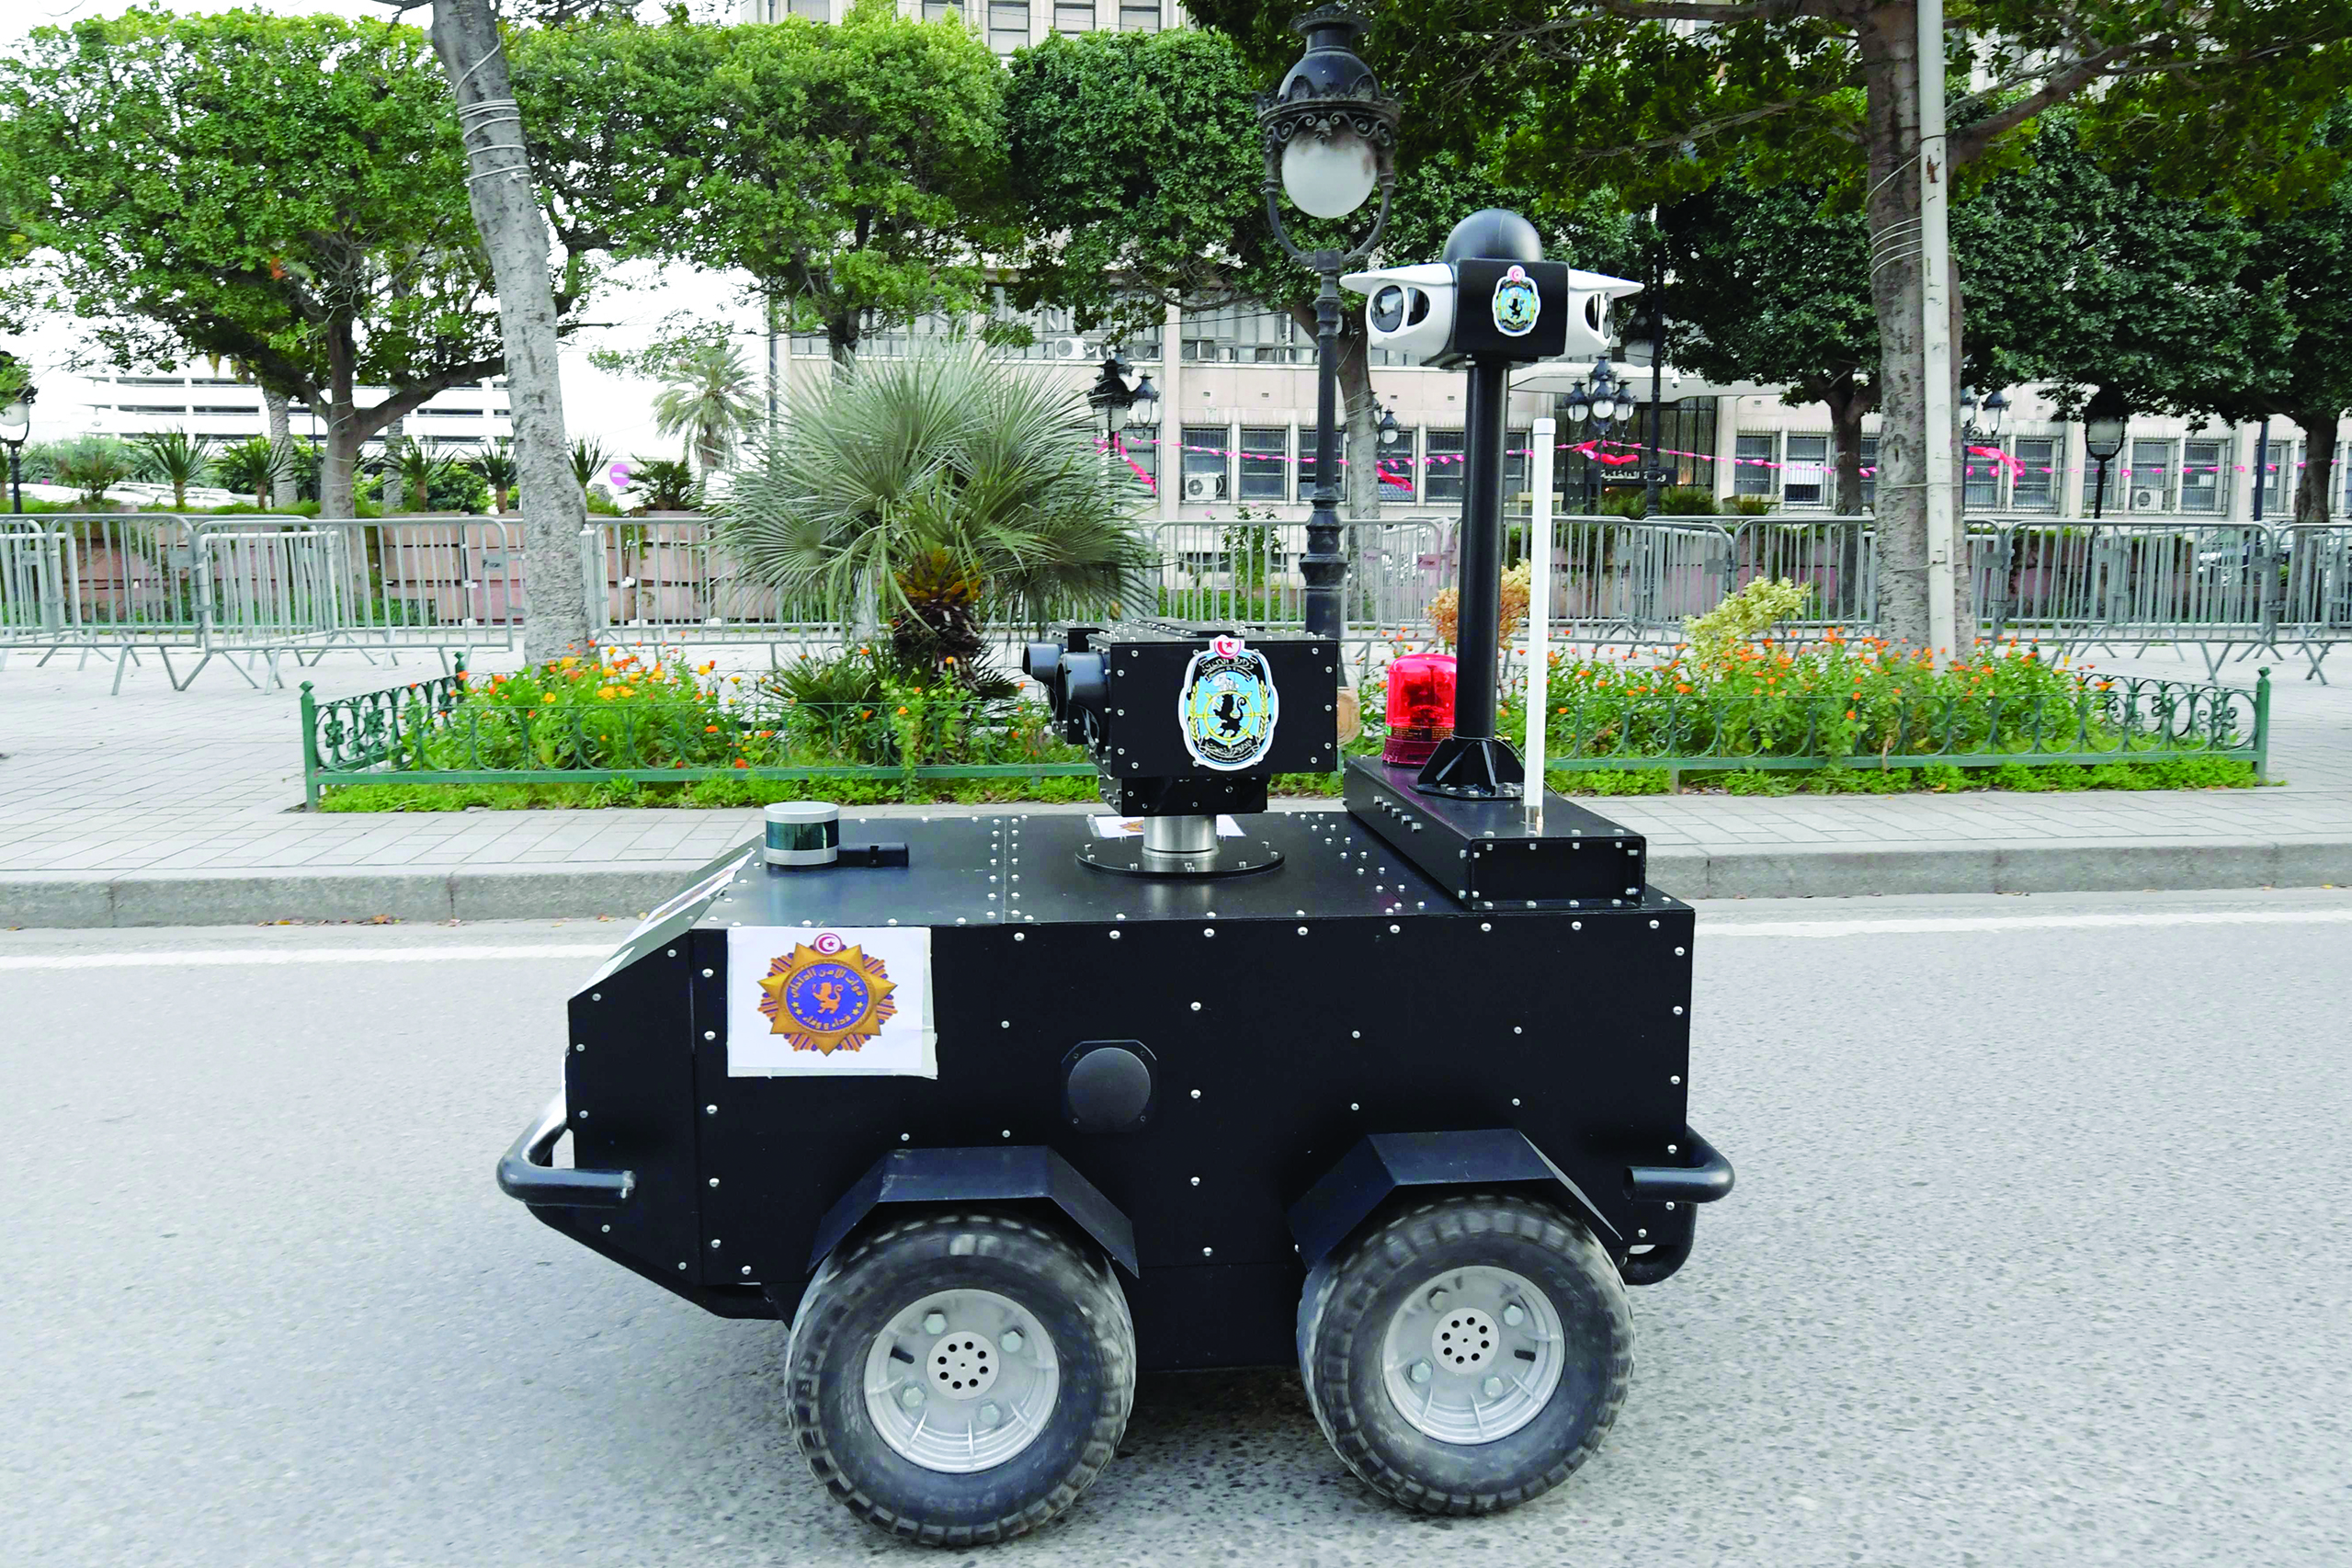 A Tunisian police robot patrols along Avenue Habib Bourguiba in the centre of the capital Tunis on April 1, 2020, as a means of enforcing a nationwide lockdown to combat the COVID-19 coronavirus pandemic. - The locally-built robots are remotely operated and equipped with infrared and thermal imaging cameras, in addition to a sound and light alarm system. (Photo by FETHI BELAID / AFP)